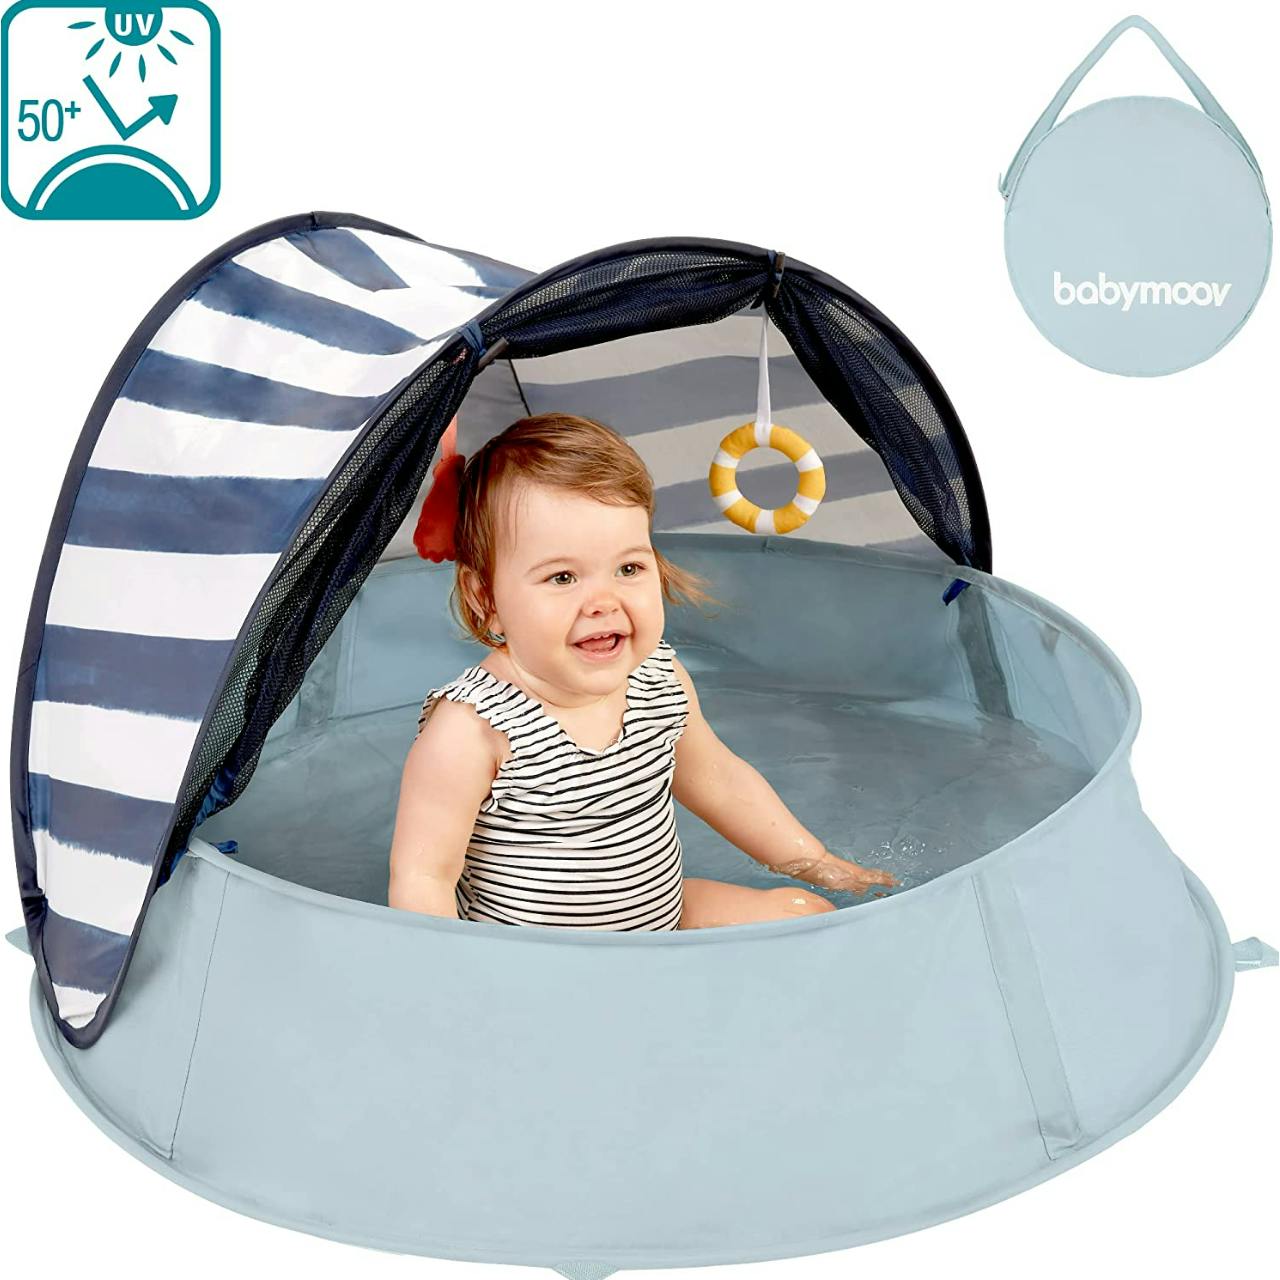 Babymoov Aquani Tent & Pool - 3 in 1 Pop Up Tent, Kiddie Pool and Play Yard · Blue/White